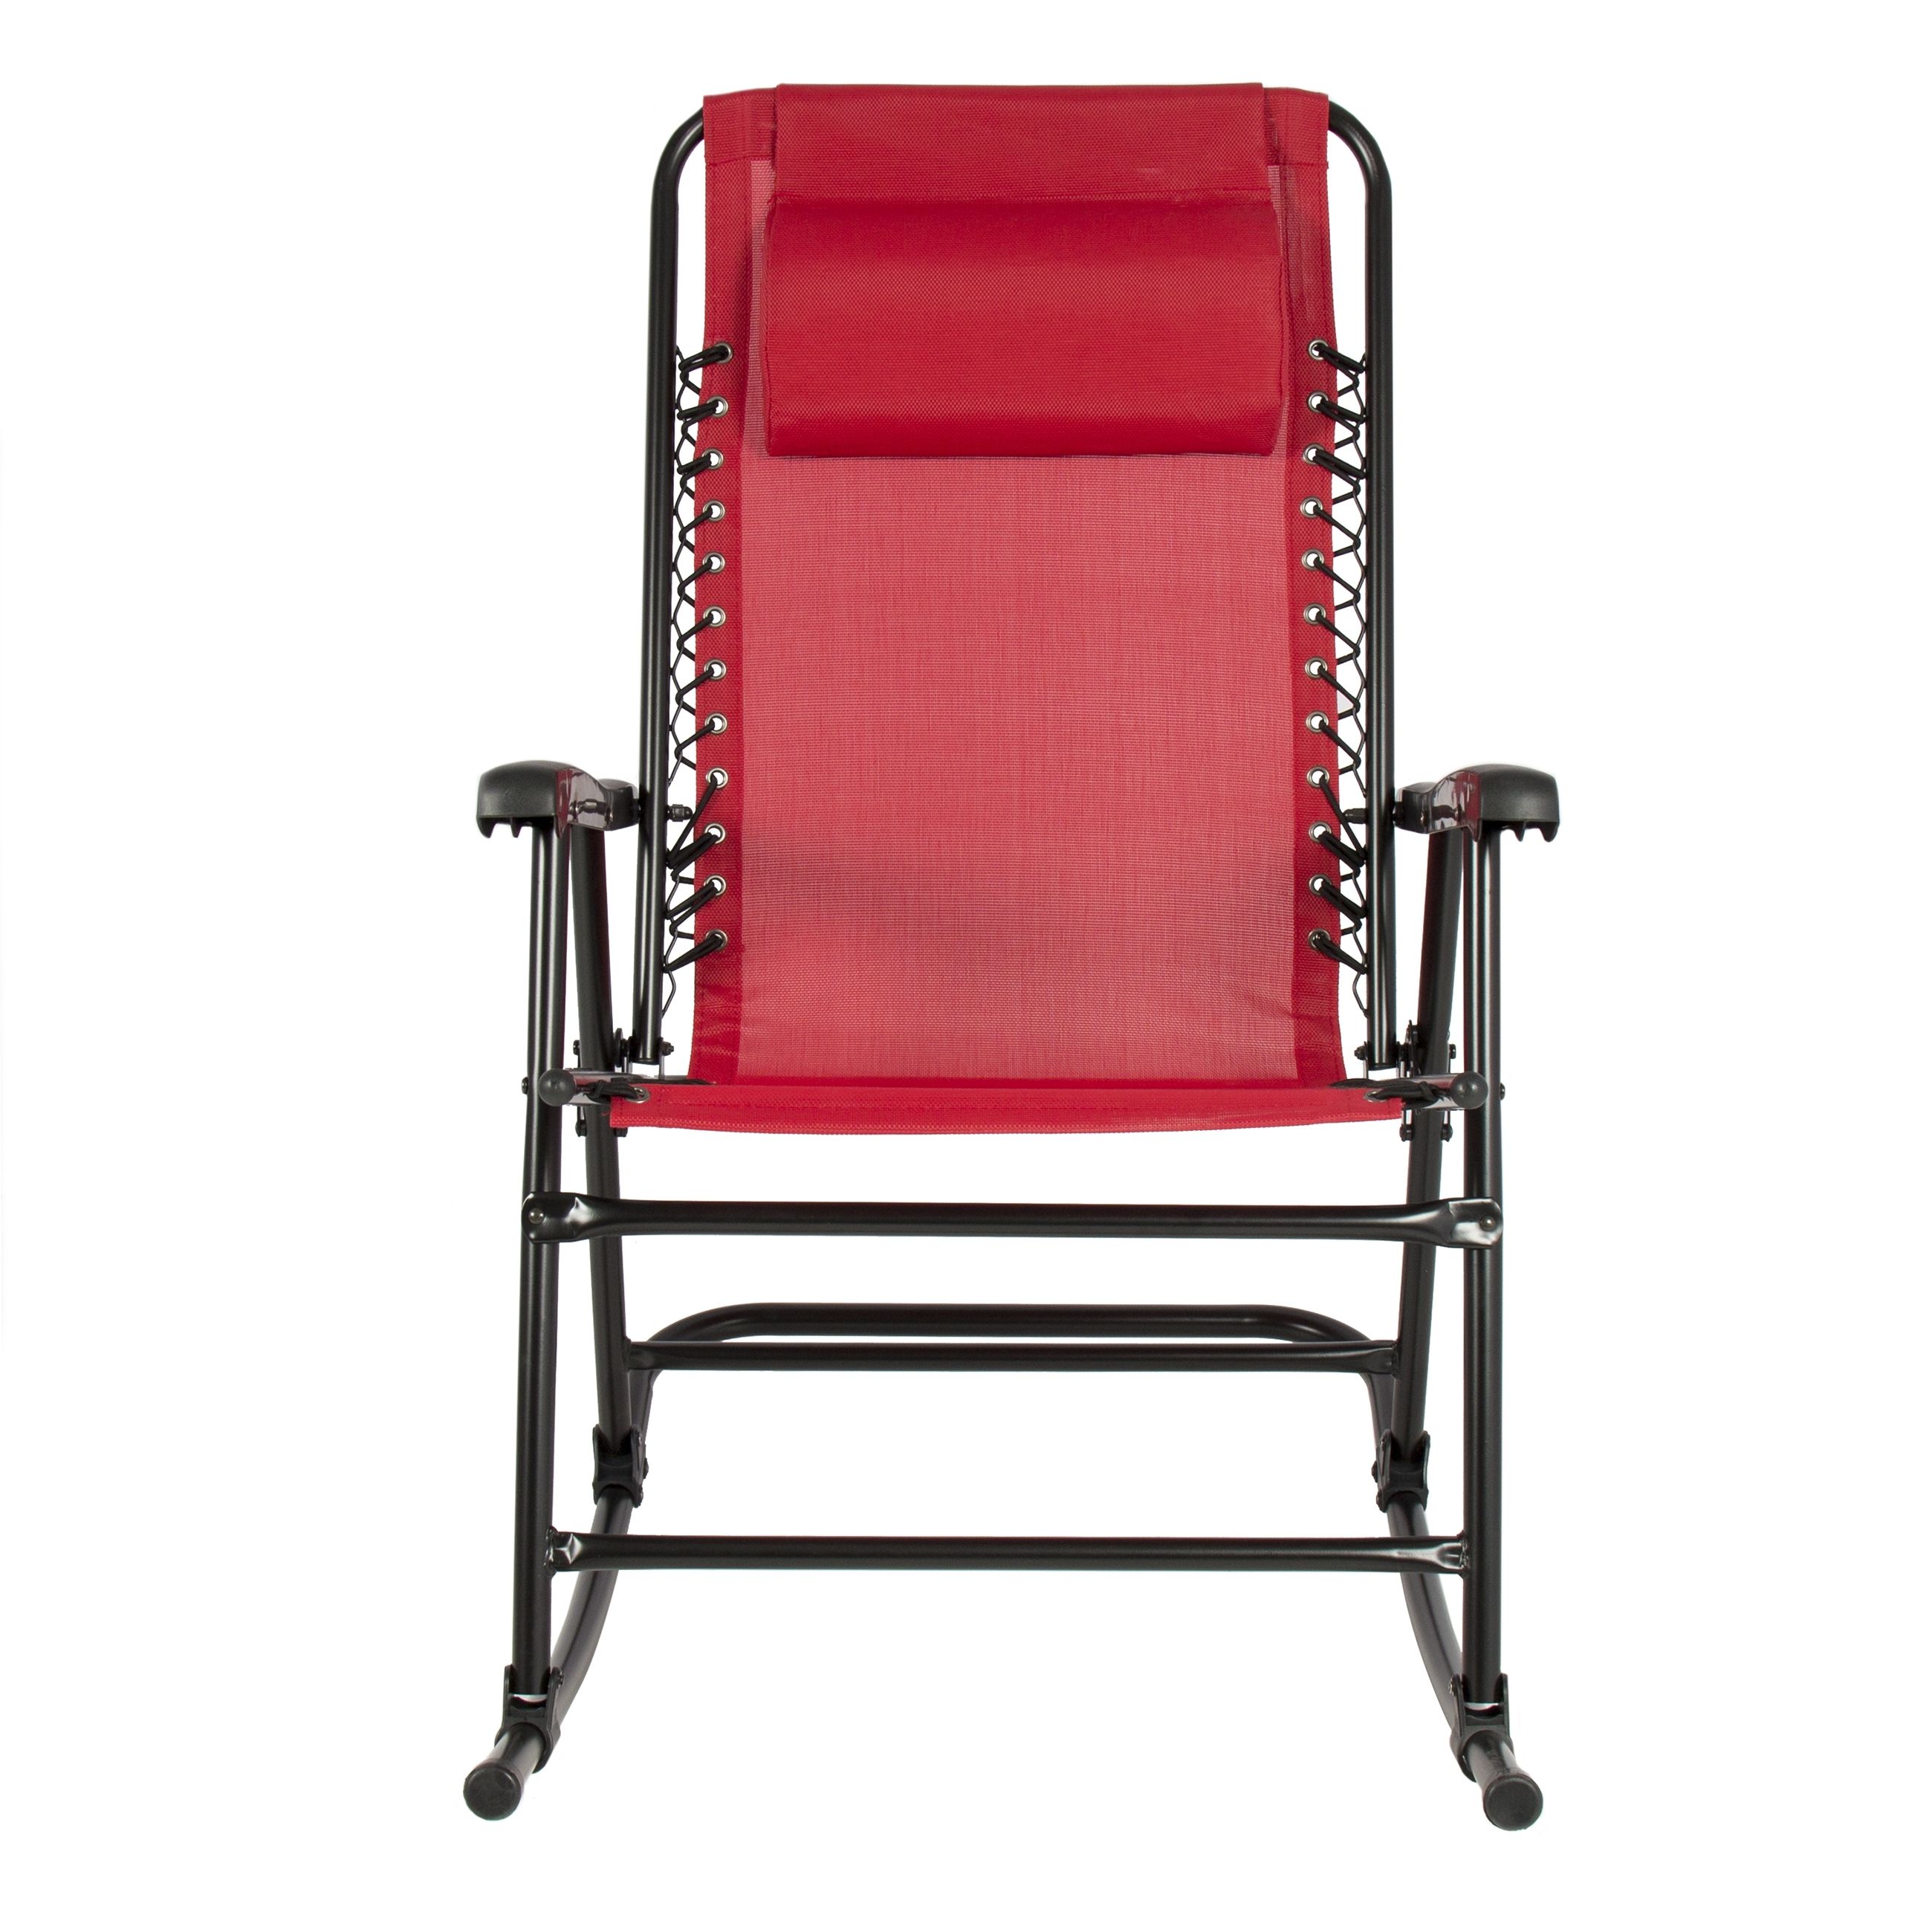 Latest Popular Of Outdoor Patio Chairs Folding Rocking Chair Foldable In Red Patio Rocking Chairs (View 13 of 15)